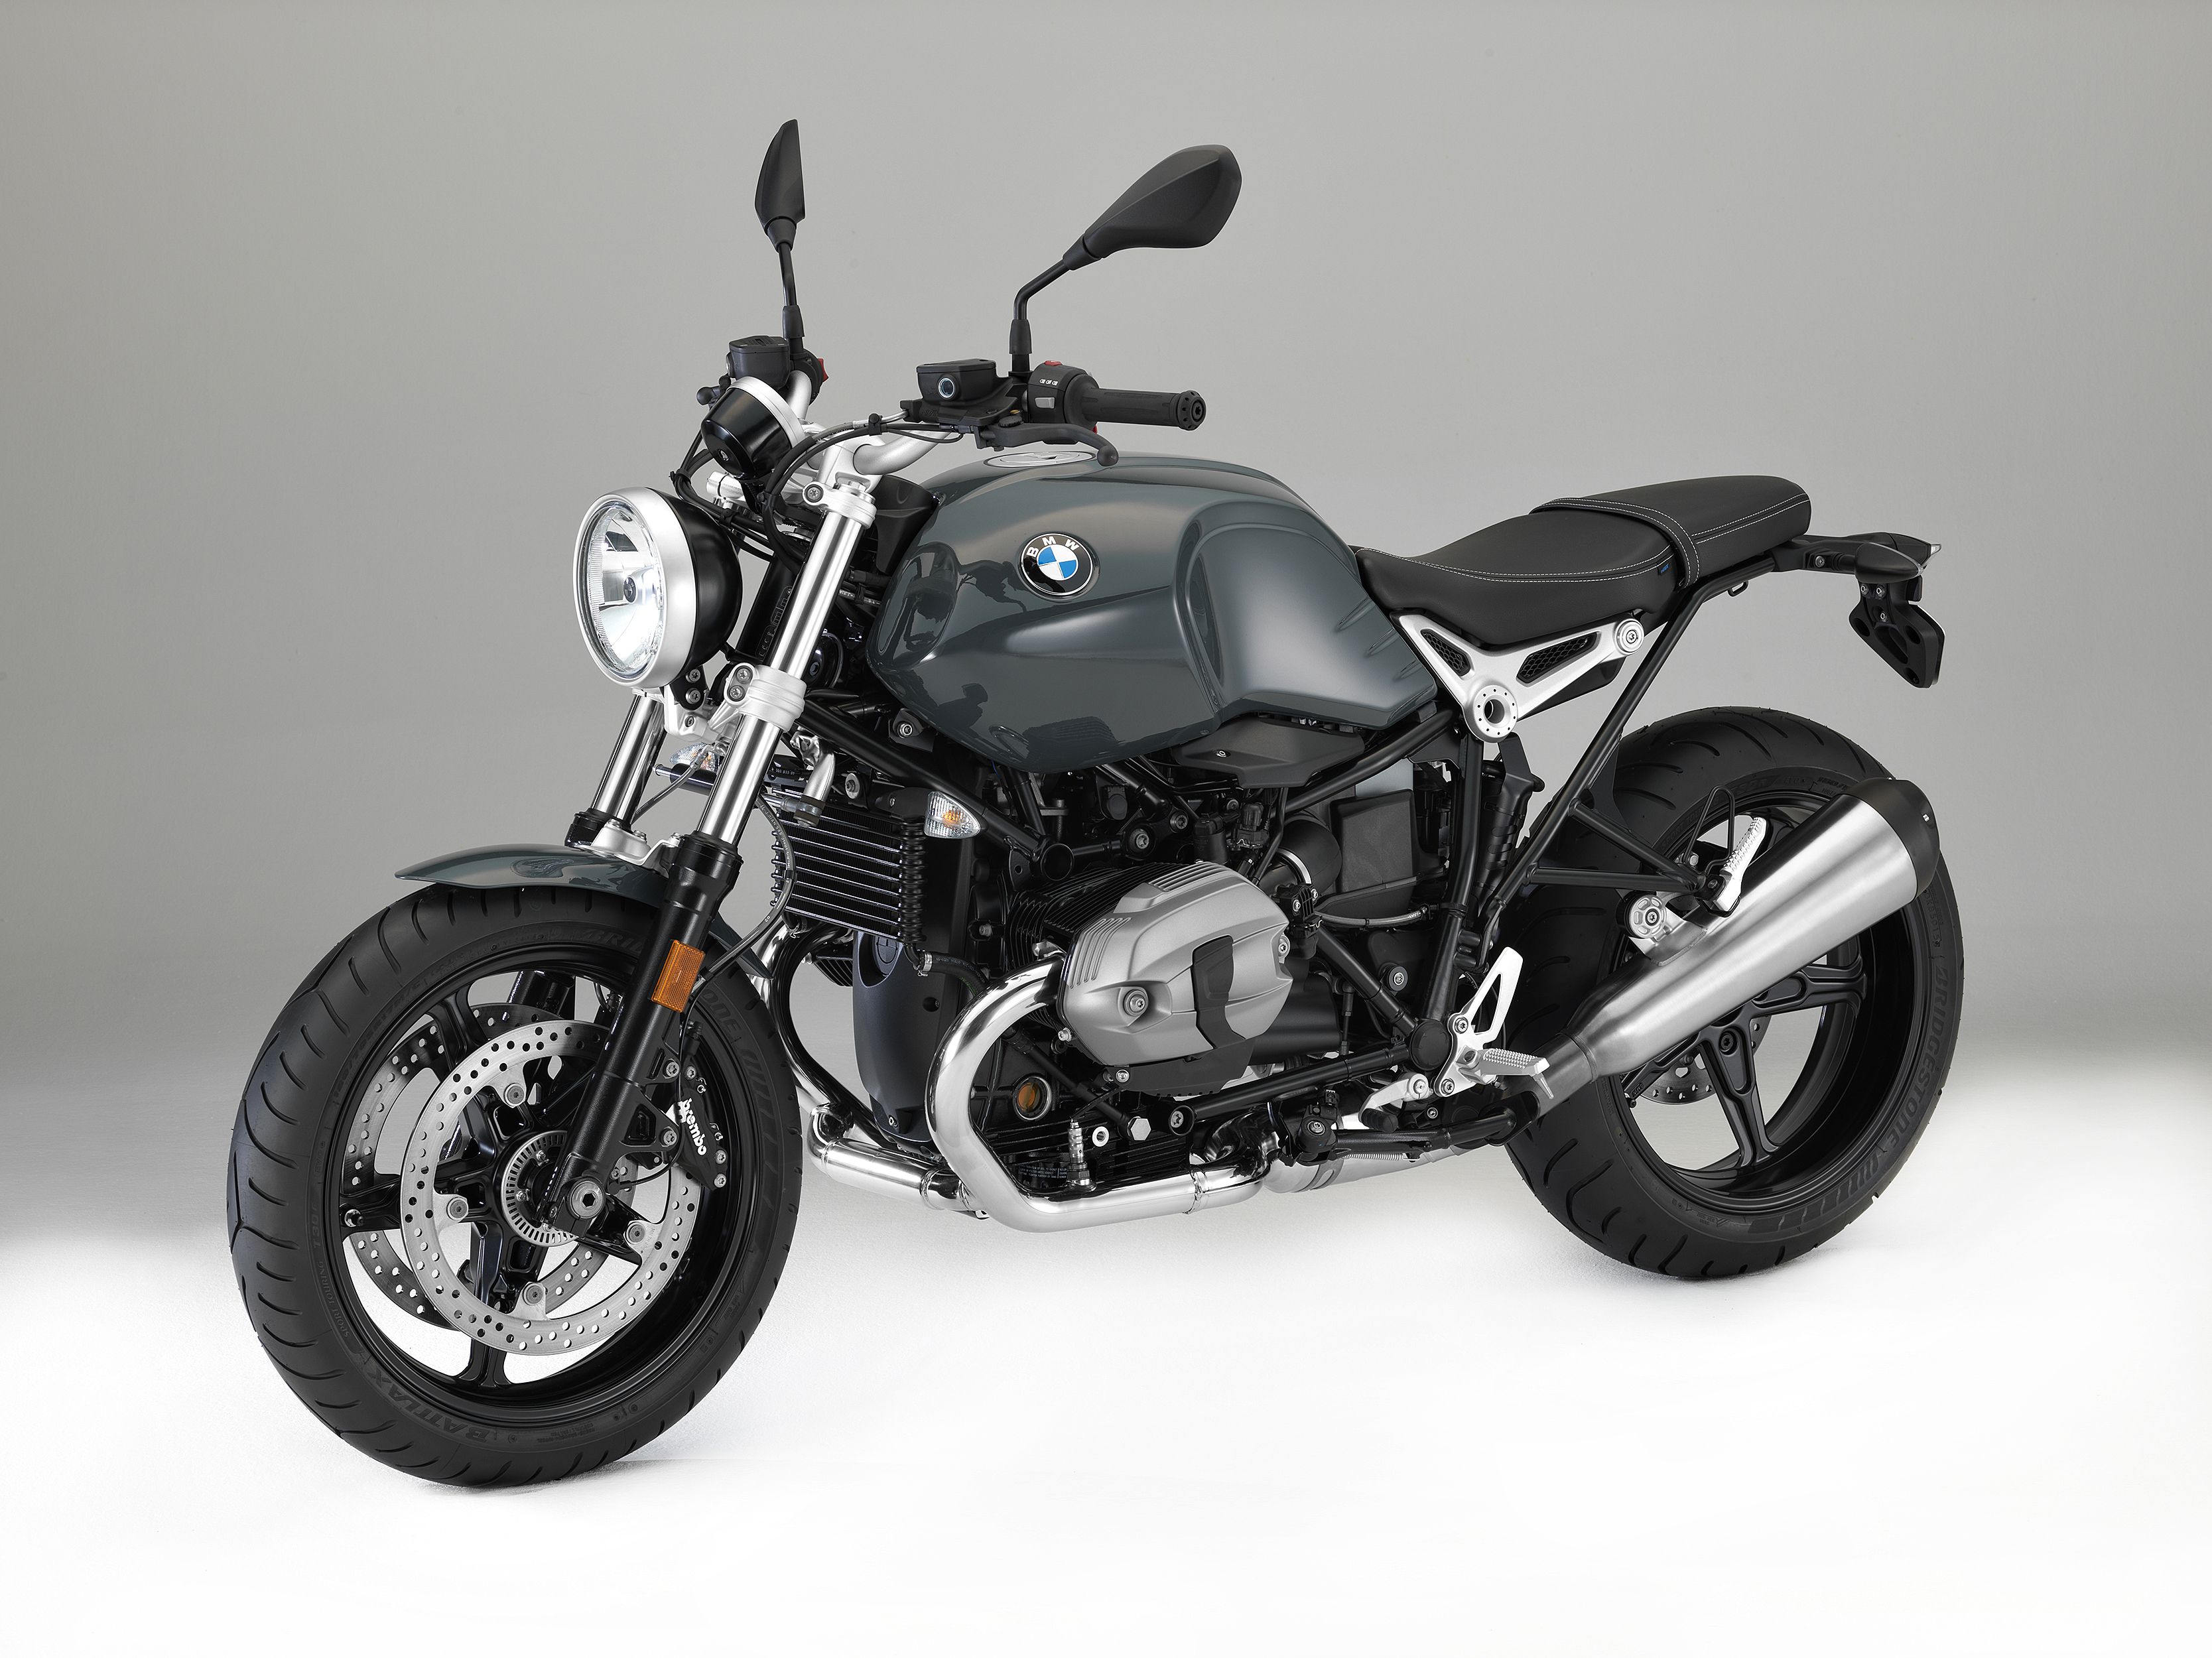 New Pricing And Equipment Updates For Select 2017 Bmw Motorcycles Cycle World